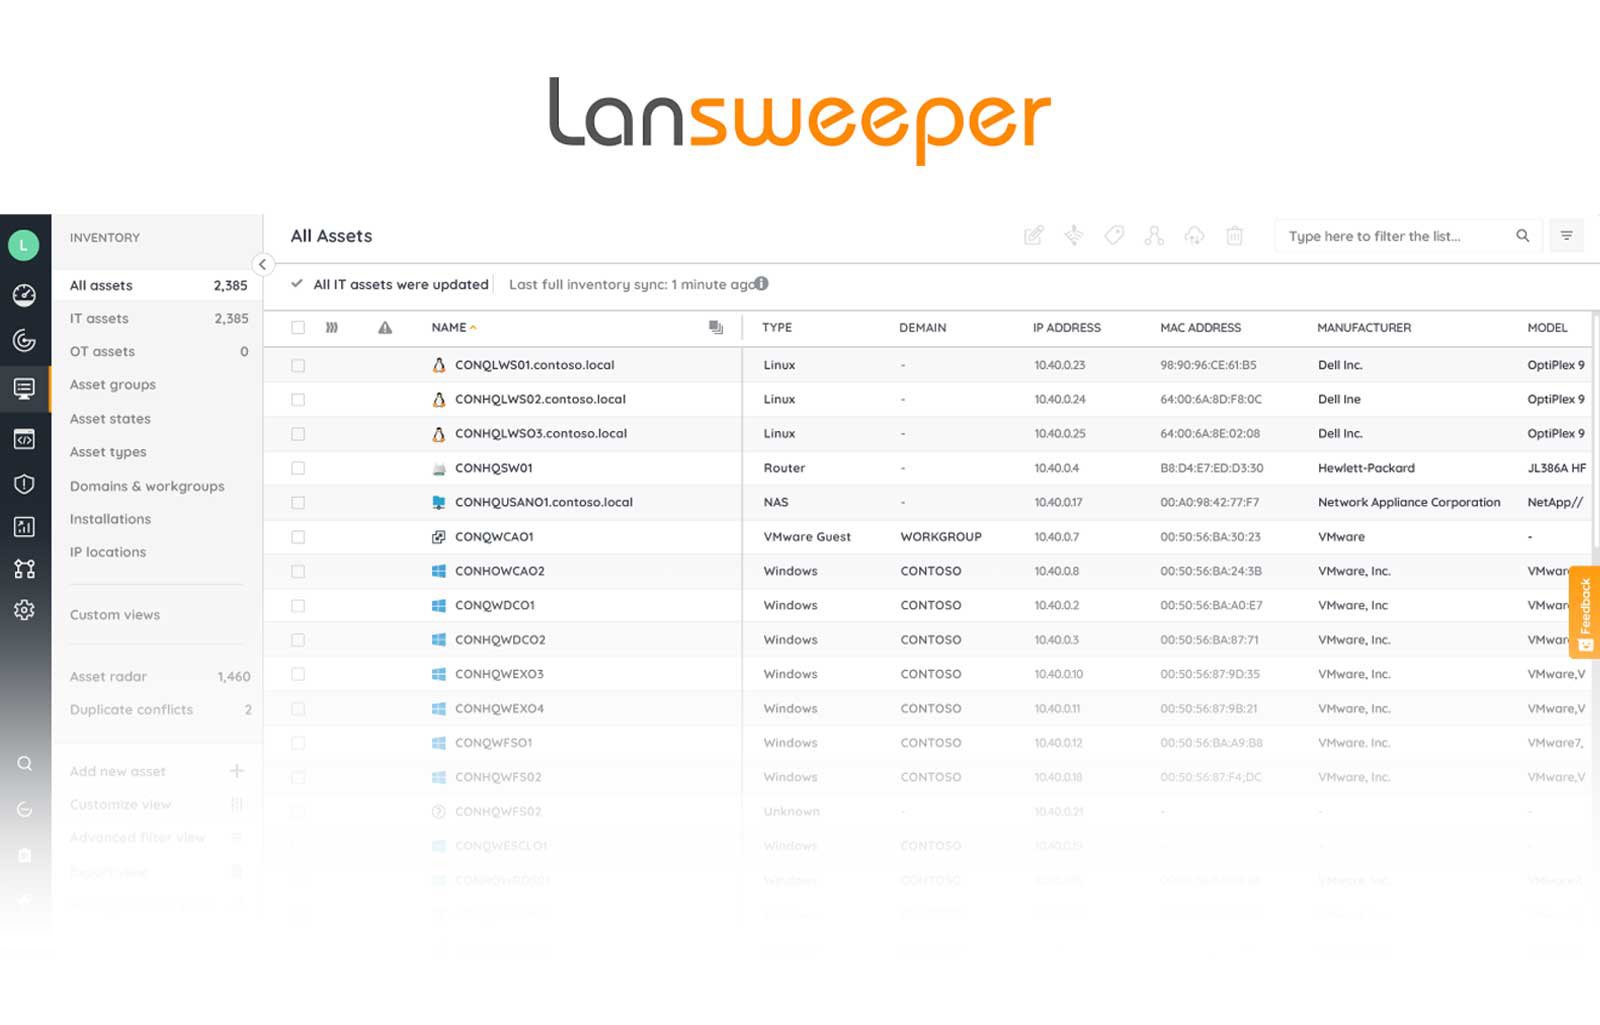 Example of Lansweeper's interface.